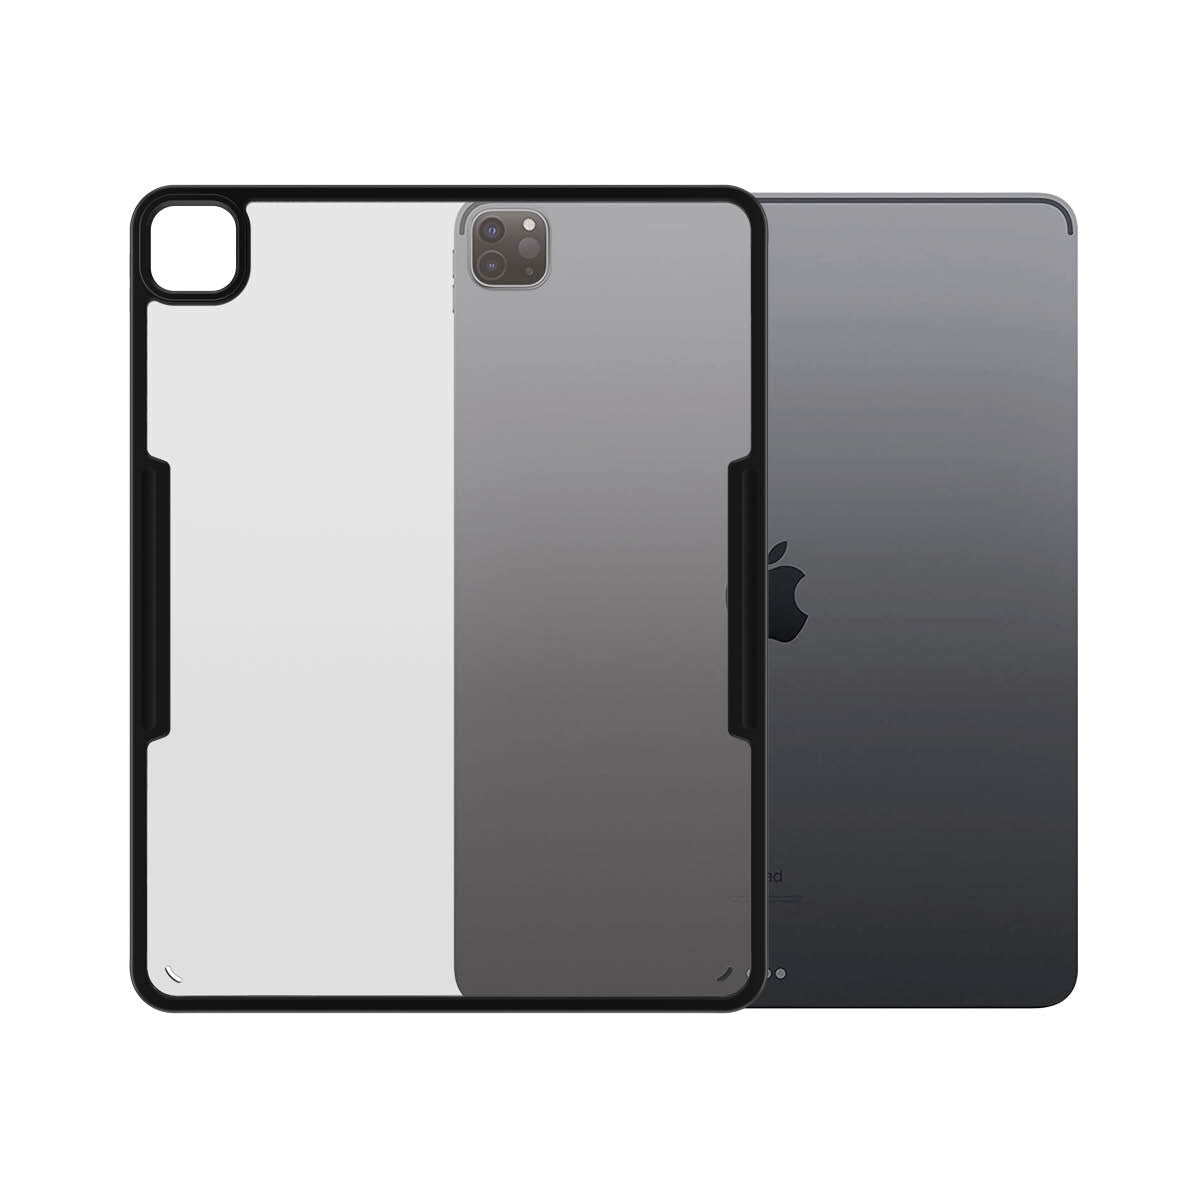 PanzerGlass ® ClearCase™ for 12.9&quot; iPad Pro in Black